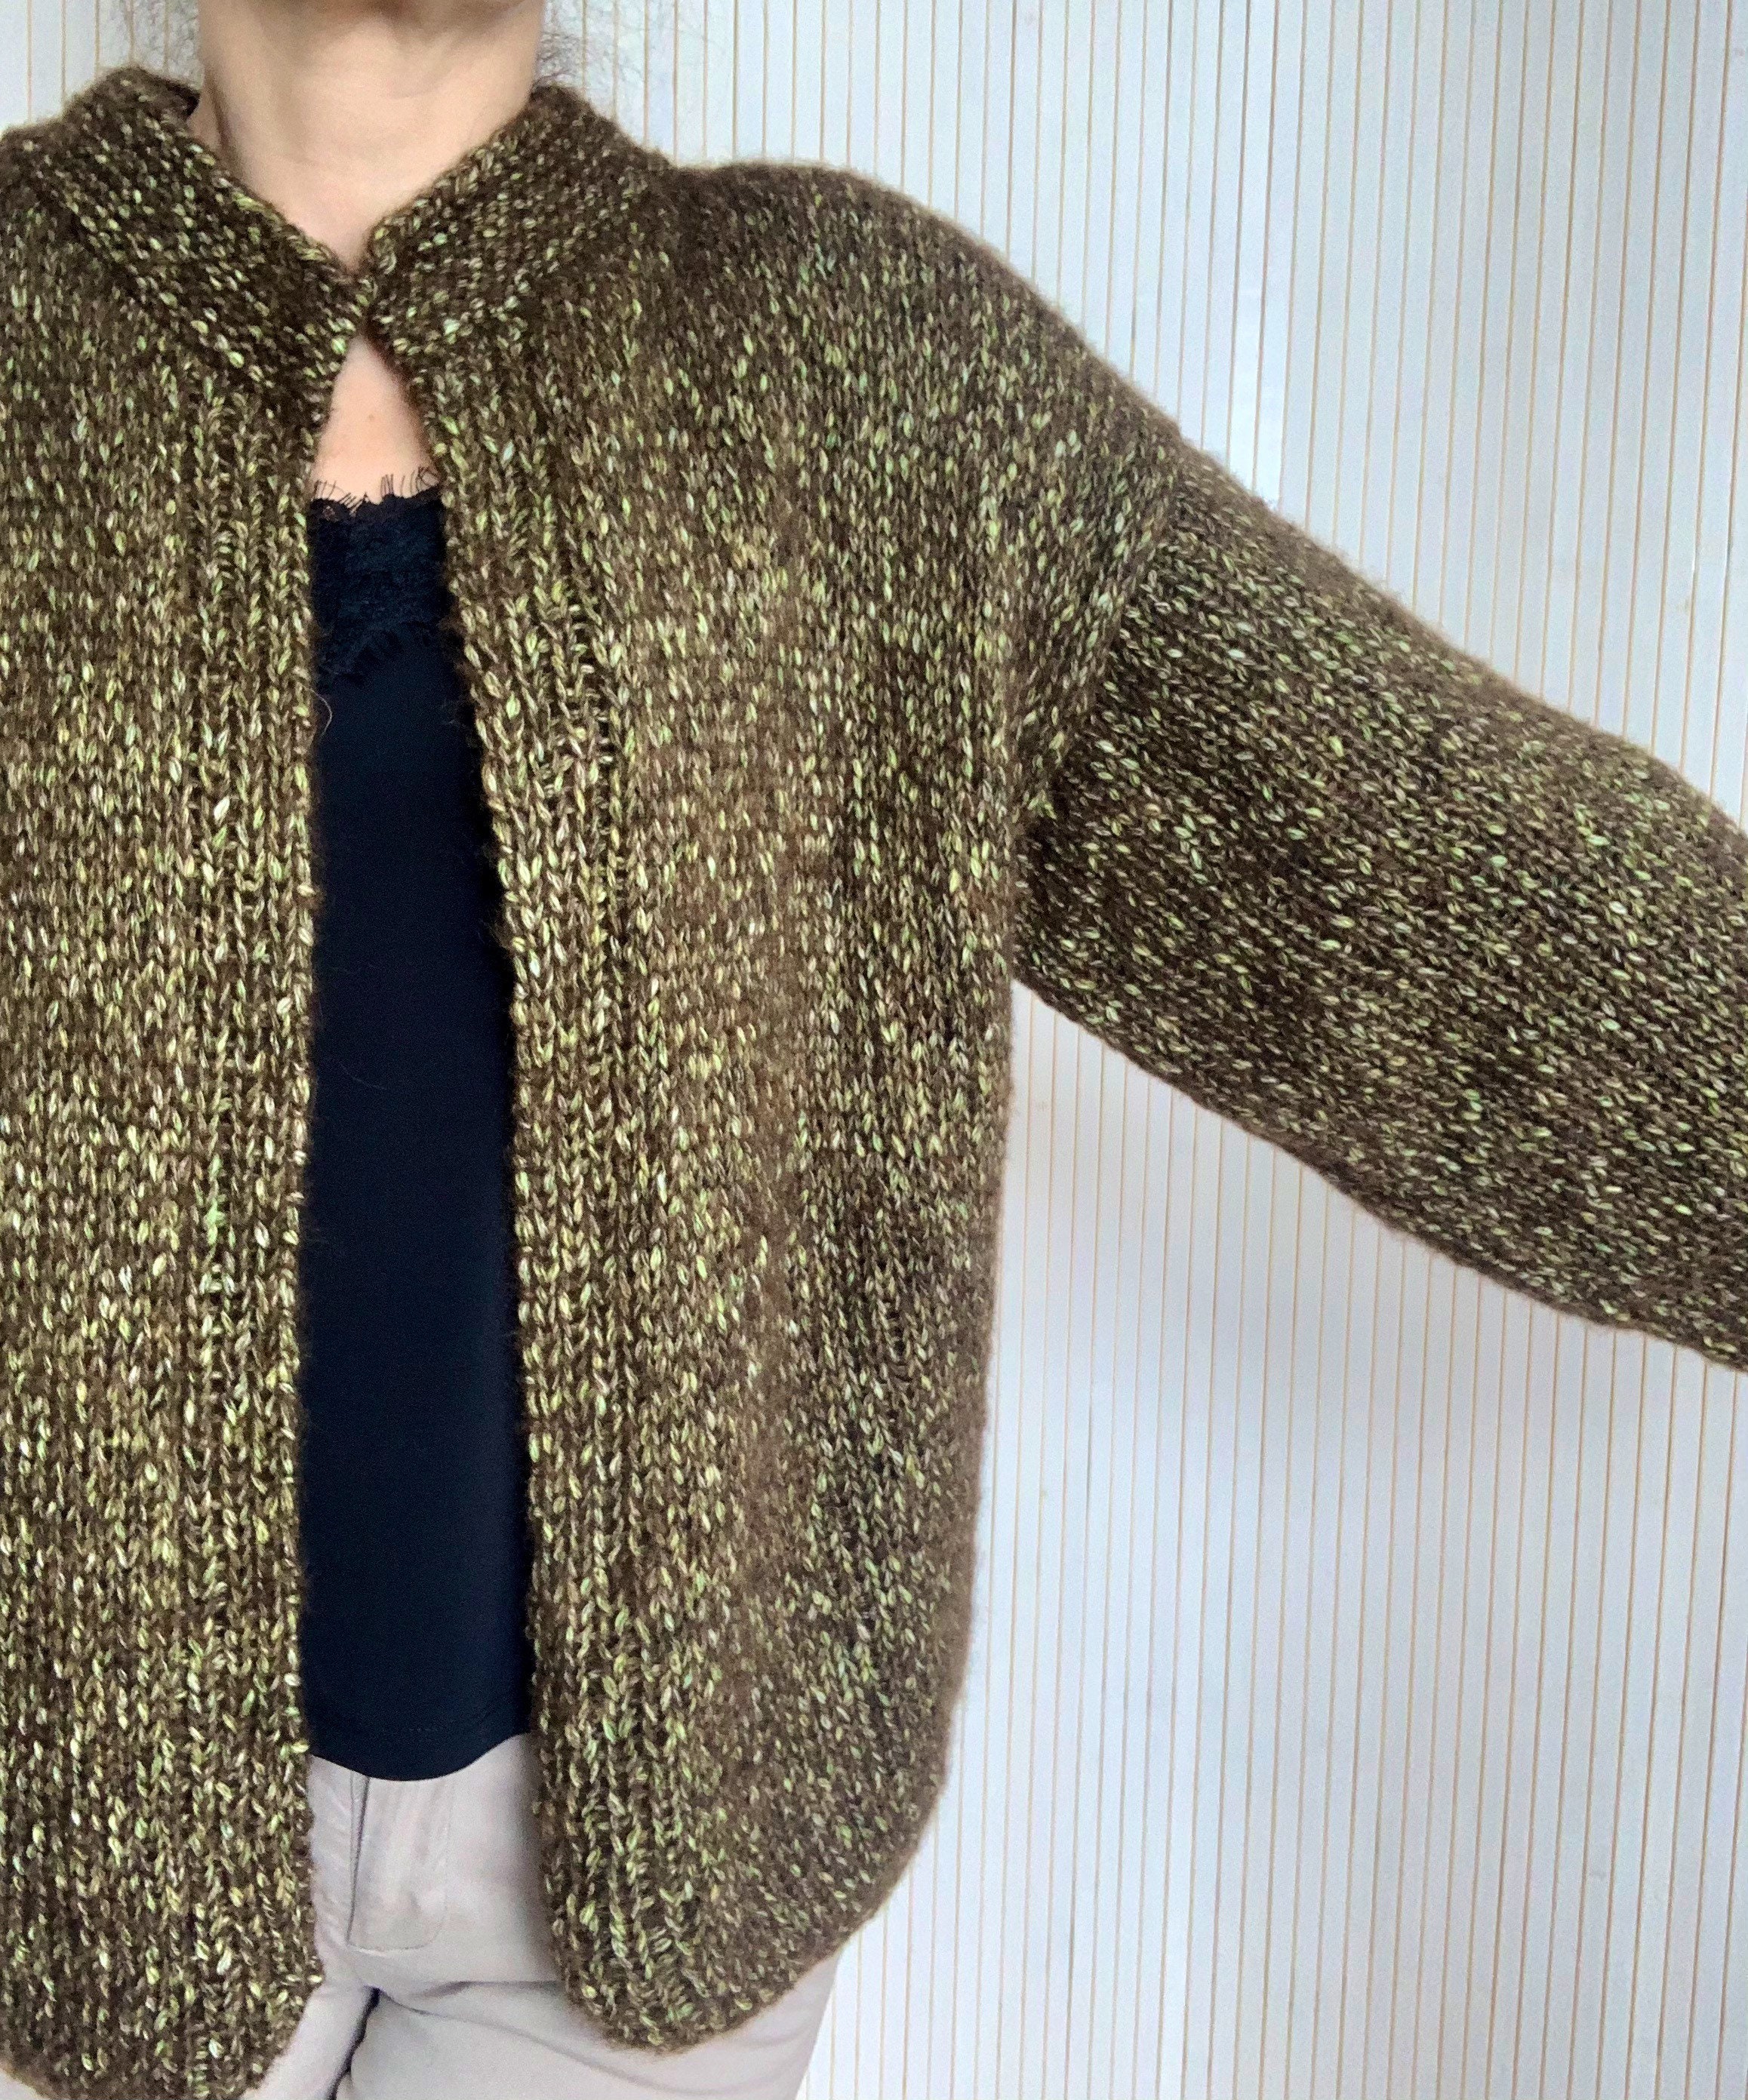 Knit Brown Cardigan For Women Mohair Cardigan Sweater | Etsy